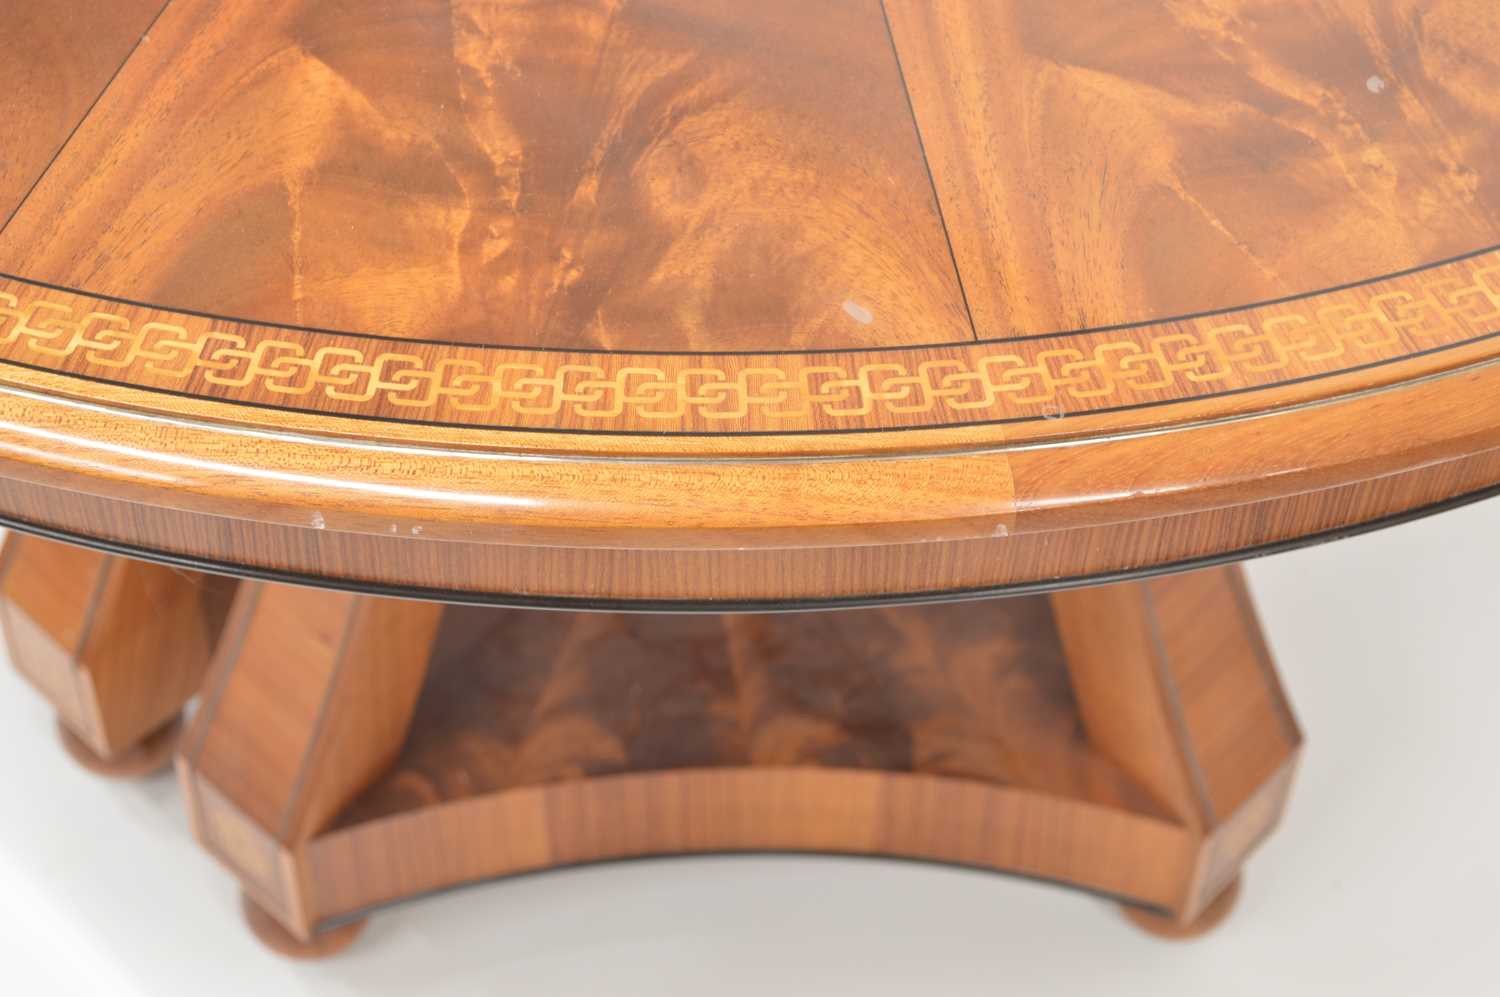 Pair of Mahogany side tables by Silver Linings workshop - Image 5 of 9